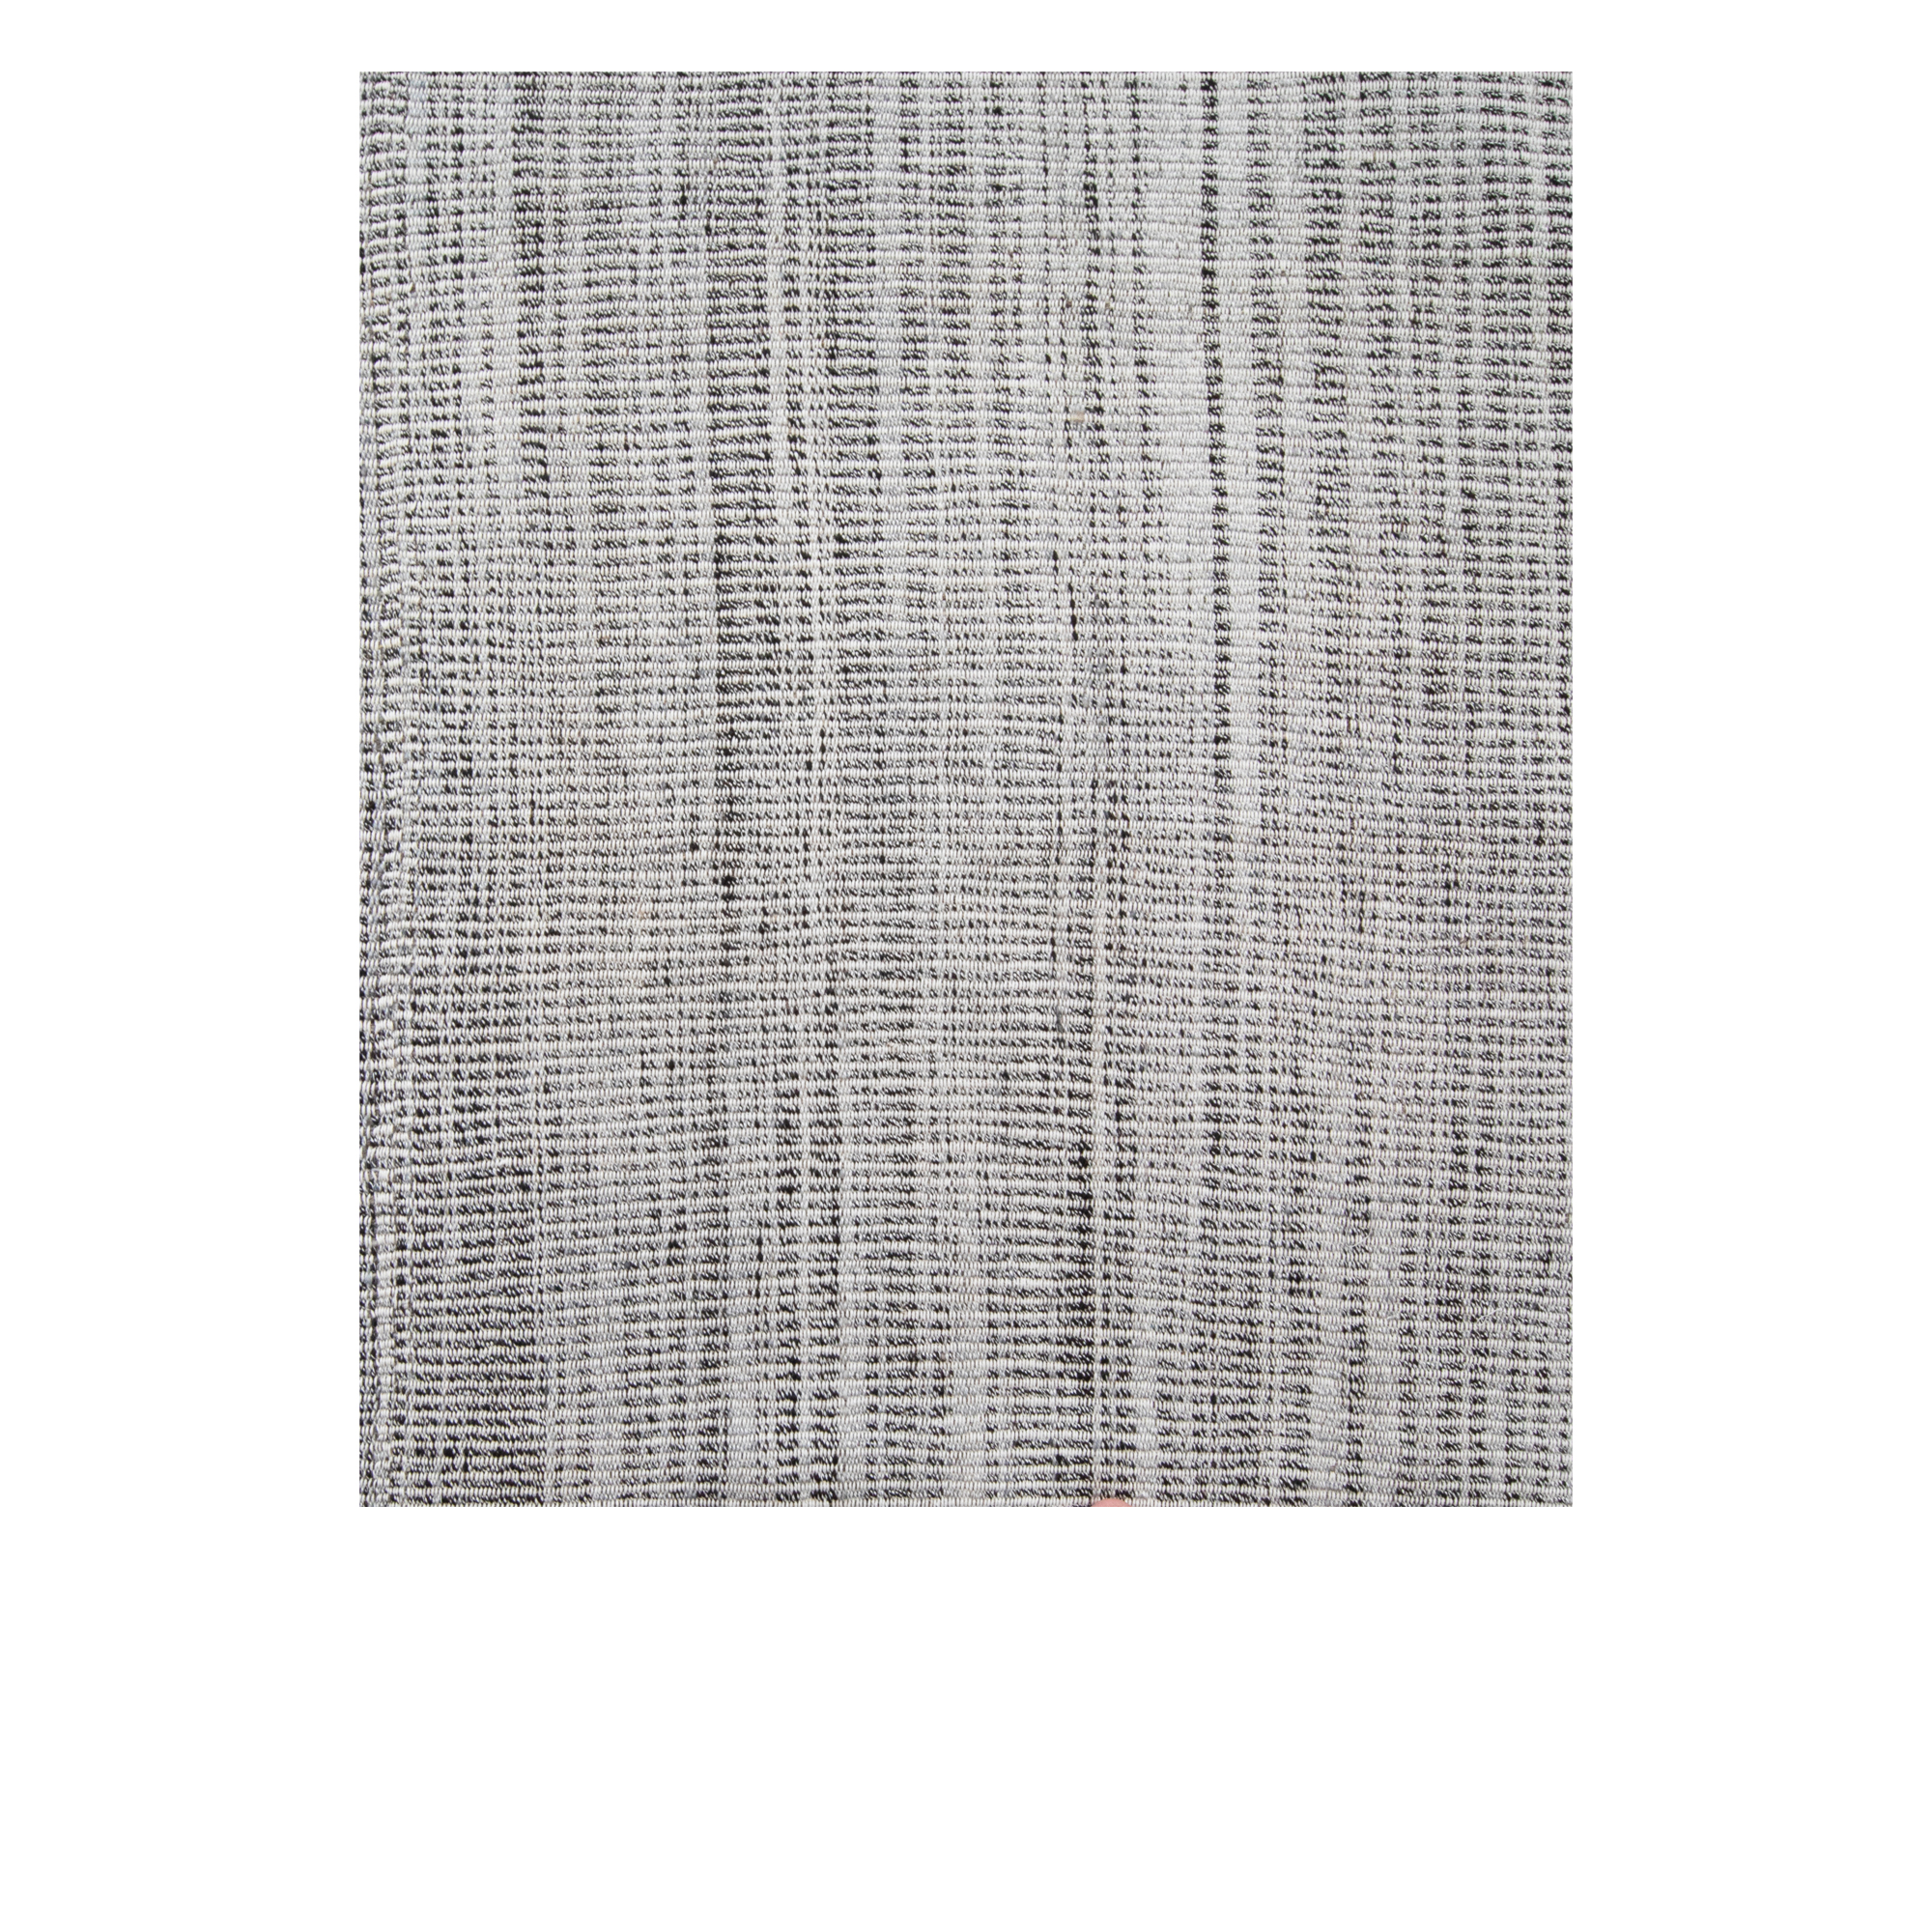 This Charmo flatweave rug made from handspun wool and natural dyes. 